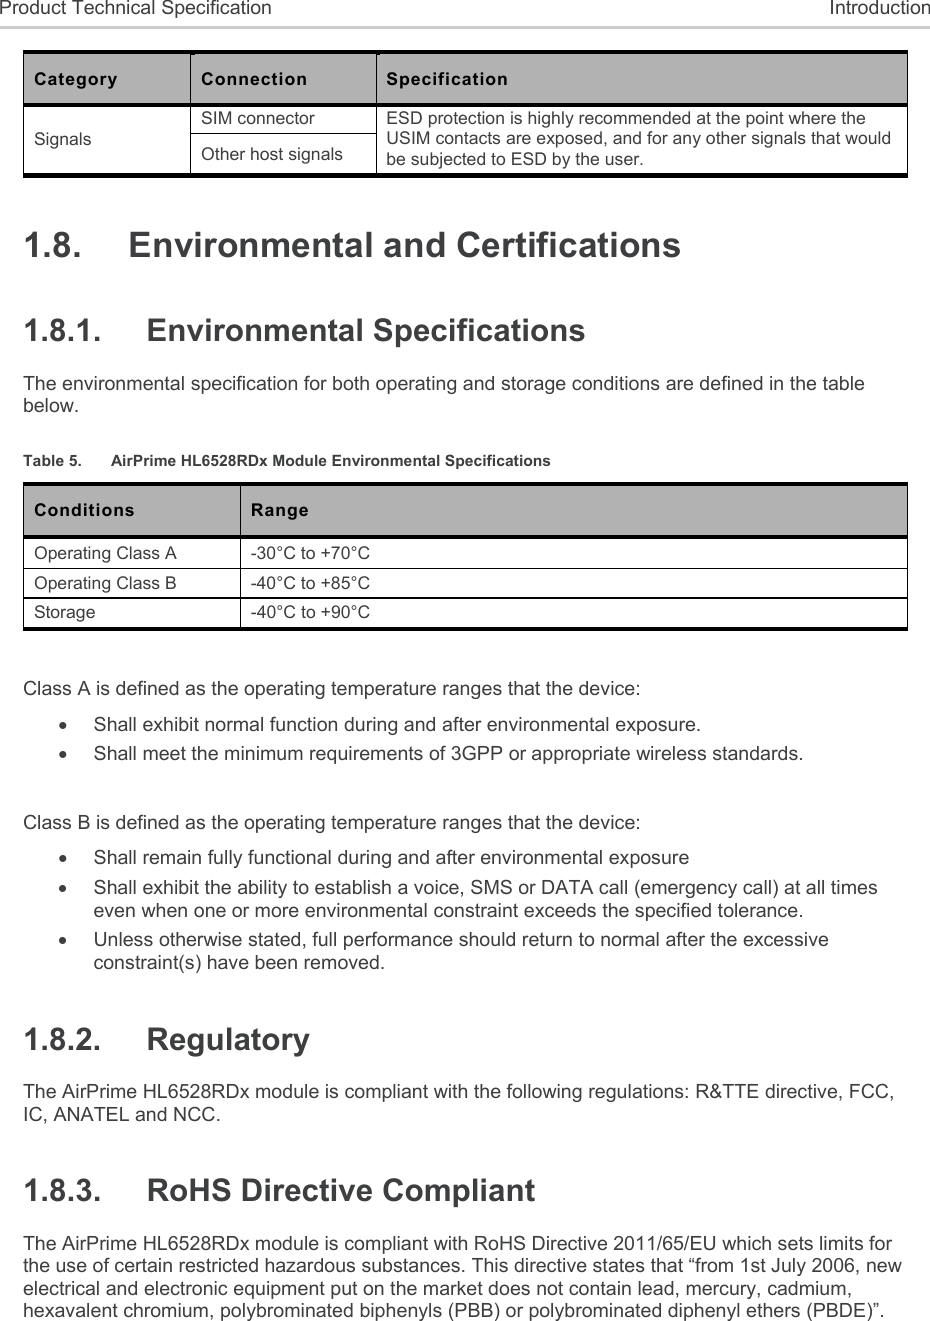  Product Technical Specification  Introduction Category  Connection  Specification Signals SIM connector  ESD protection is highly recommended at the point where the USIM contacts are exposed, and for any other signals that would be subjected to ESD by the user. Other host signals 1.8.  Environmental and Certifications 1.8.1.  Environmental Specifications The environmental specification for both operating and storage conditions are defined in the table below. Table 5.  AirPrime HL6528RDx Module Environmental Specifications Conditions  Range Operating Class A  -30°C to +70°C Operating Class B  -40°C to +85°C Storage  -40°C to +90°C  Class A is defined as the operating temperature ranges that the device:    Shall exhibit normal function during and after environmental exposure.    Shall meet the minimum requirements of 3GPP or appropriate wireless standards.   Class B is defined as the operating temperature ranges that the device:     Shall remain fully functional during and after environmental exposure    Shall exhibit the ability to establish a voice, SMS or DATA call (emergency call) at all times even when one or more environmental constraint exceeds the specified tolerance.    Unless otherwise stated, full performance should return to normal after the excessive constraint(s) have been removed. 1.8.2.  Regulatory The AirPrime HL6528RDx module is compliant with the following regulations: R&amp;TTE directive, FCC, IC, ANATEL and NCC. 1.8.3.  RoHS Directive Compliant The AirPrime HL6528RDx module is compliant with RoHS Directive 2011/65/EU which sets limits for the use of certain restricted hazardous substances. This directive states that “from 1st July 2006, new electrical and electronic equipment put on the market does not contain lead, mercury, cadmium, hexavalent chromium, polybrominated biphenyls (PBB) or polybrominated diphenyl ethers (PBDE)”. 